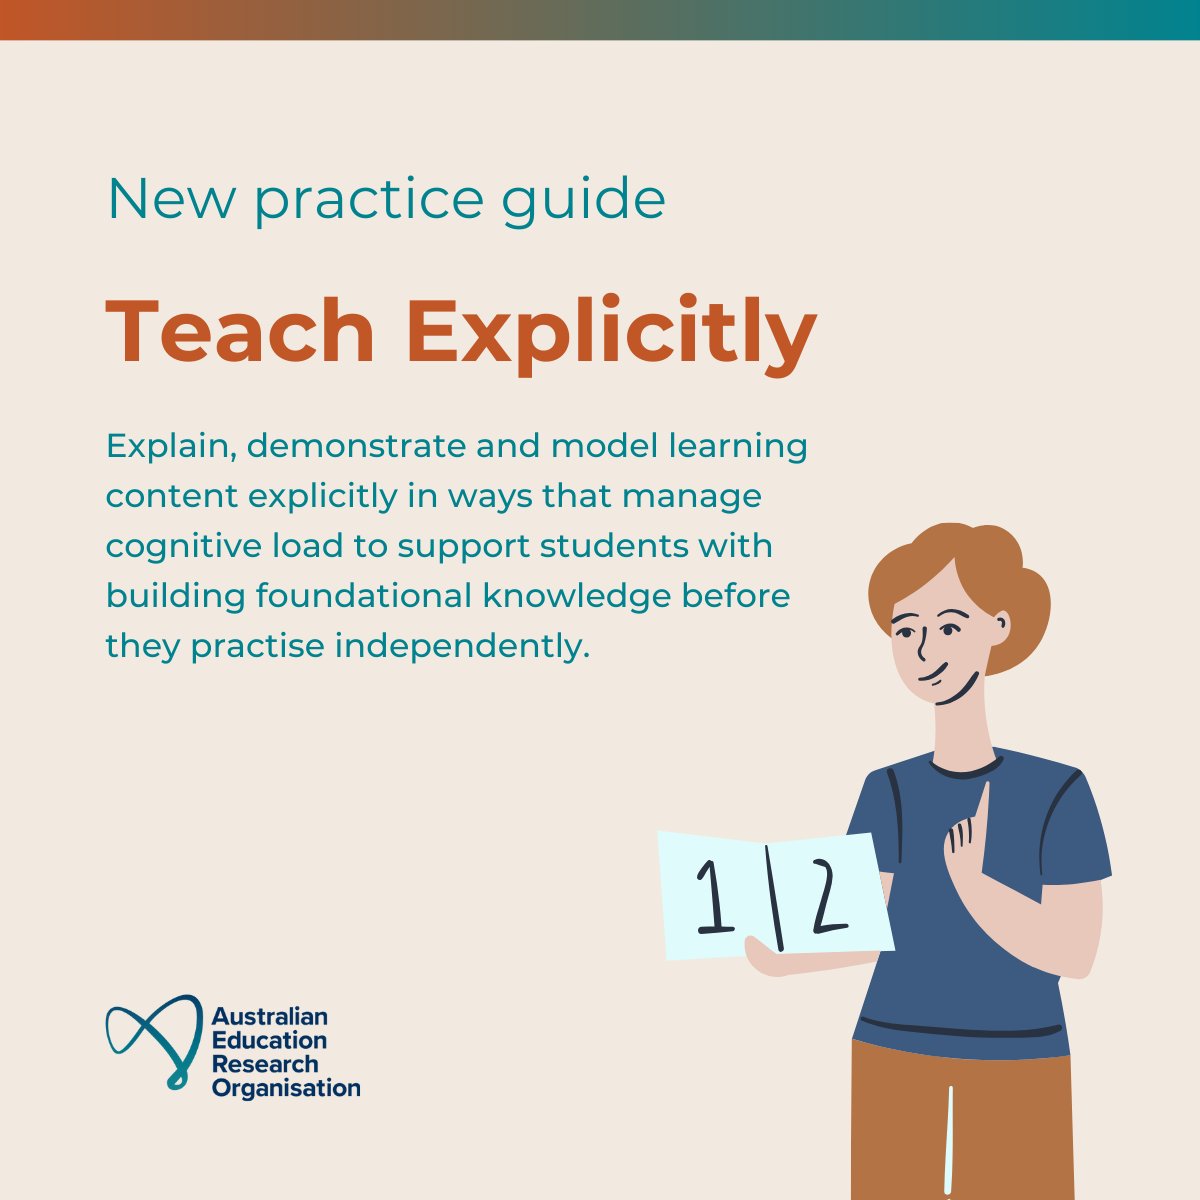 Check out our latest practice guide on explicit teaching. Teaching explicitly helps students grasp new information effectively while minimising cognitive overload. Plus, it supports them to build on their existing knowledge to gain a deeper understanding. bit.ly/3J6xZTk